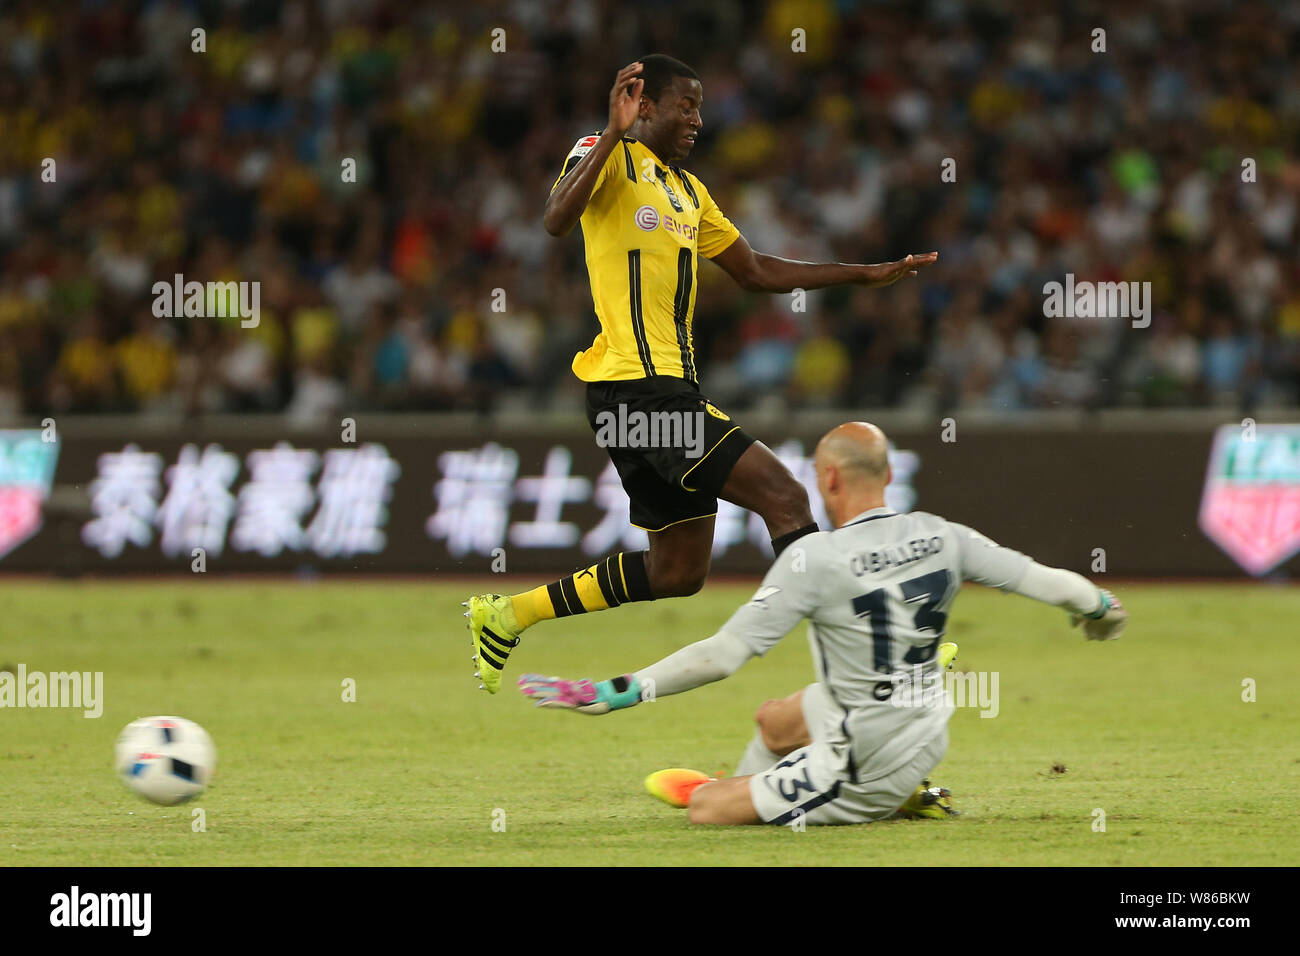 Adrian Ramos of Borussia Dortmund, top, jumps over goalkeeper Willy Caballero of Manchester City during the Shenzhen match of the 2016 International C Stock Photo